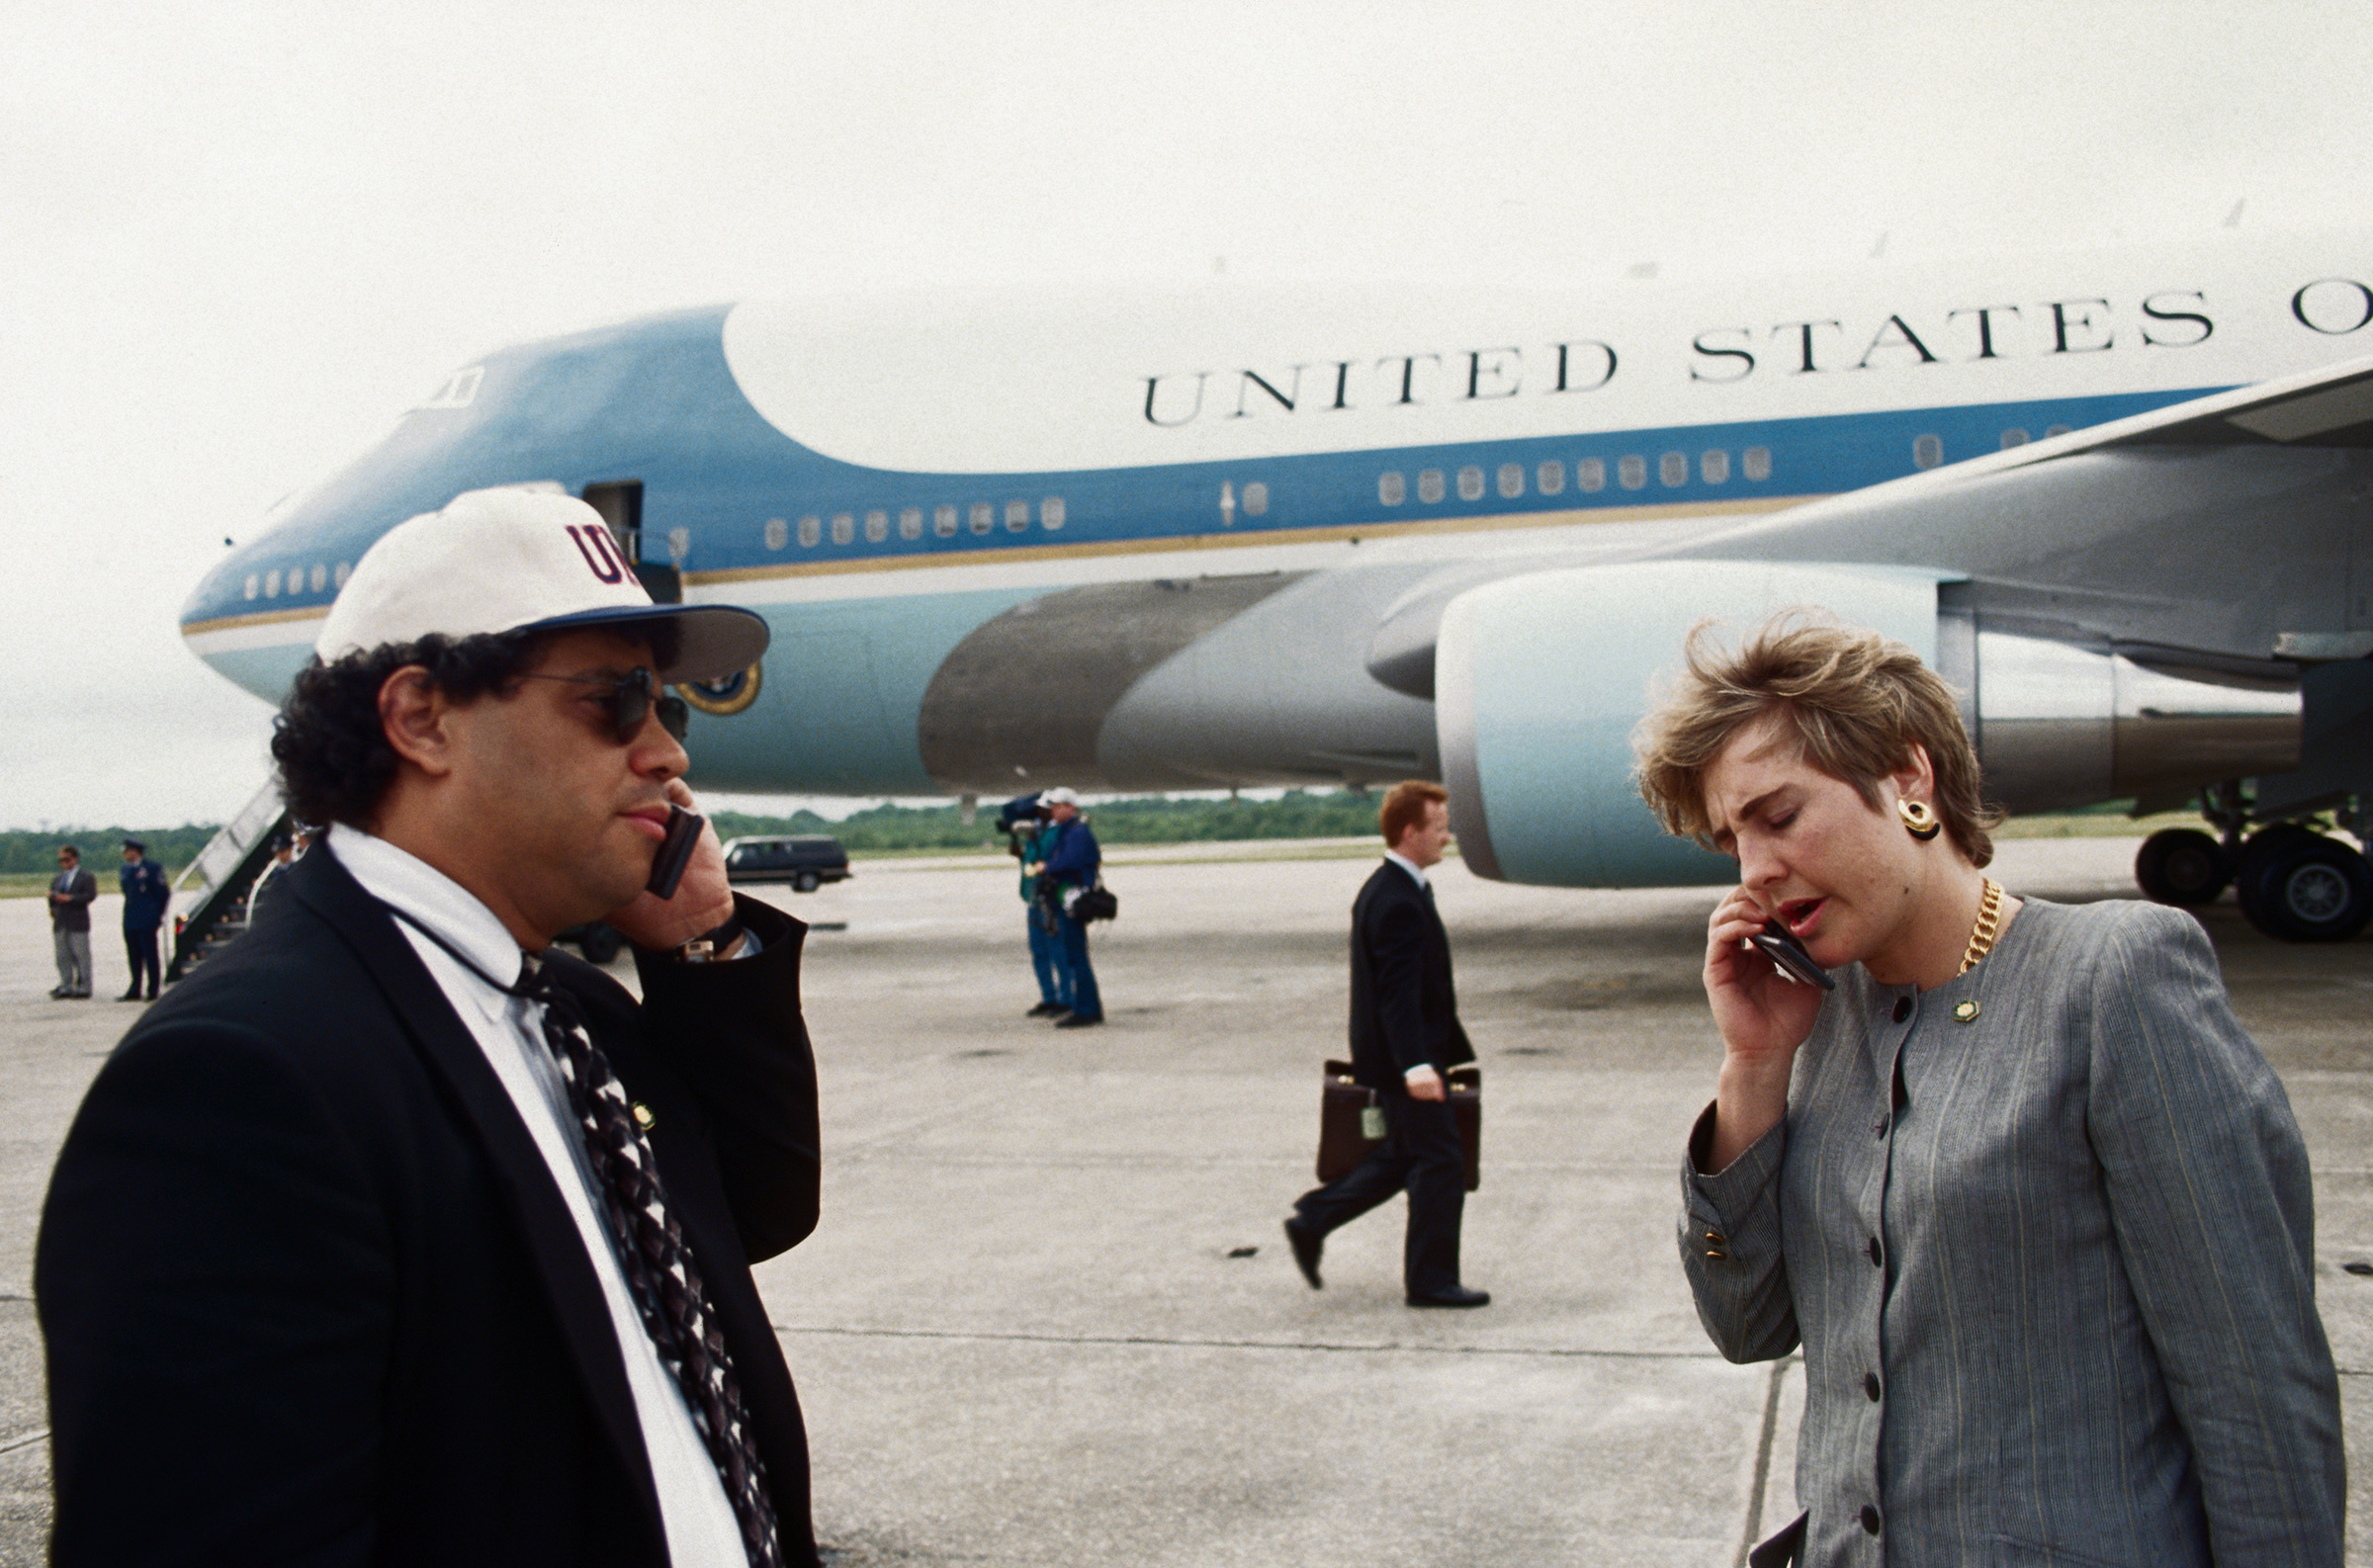 Presidential advisers Steve Rabinowitz and Dee Dee Myers talk on cell phones on the tarmac next to Air Force One, on April 30, 1993. (Wally McNamee—CORBIS/Getty Images)